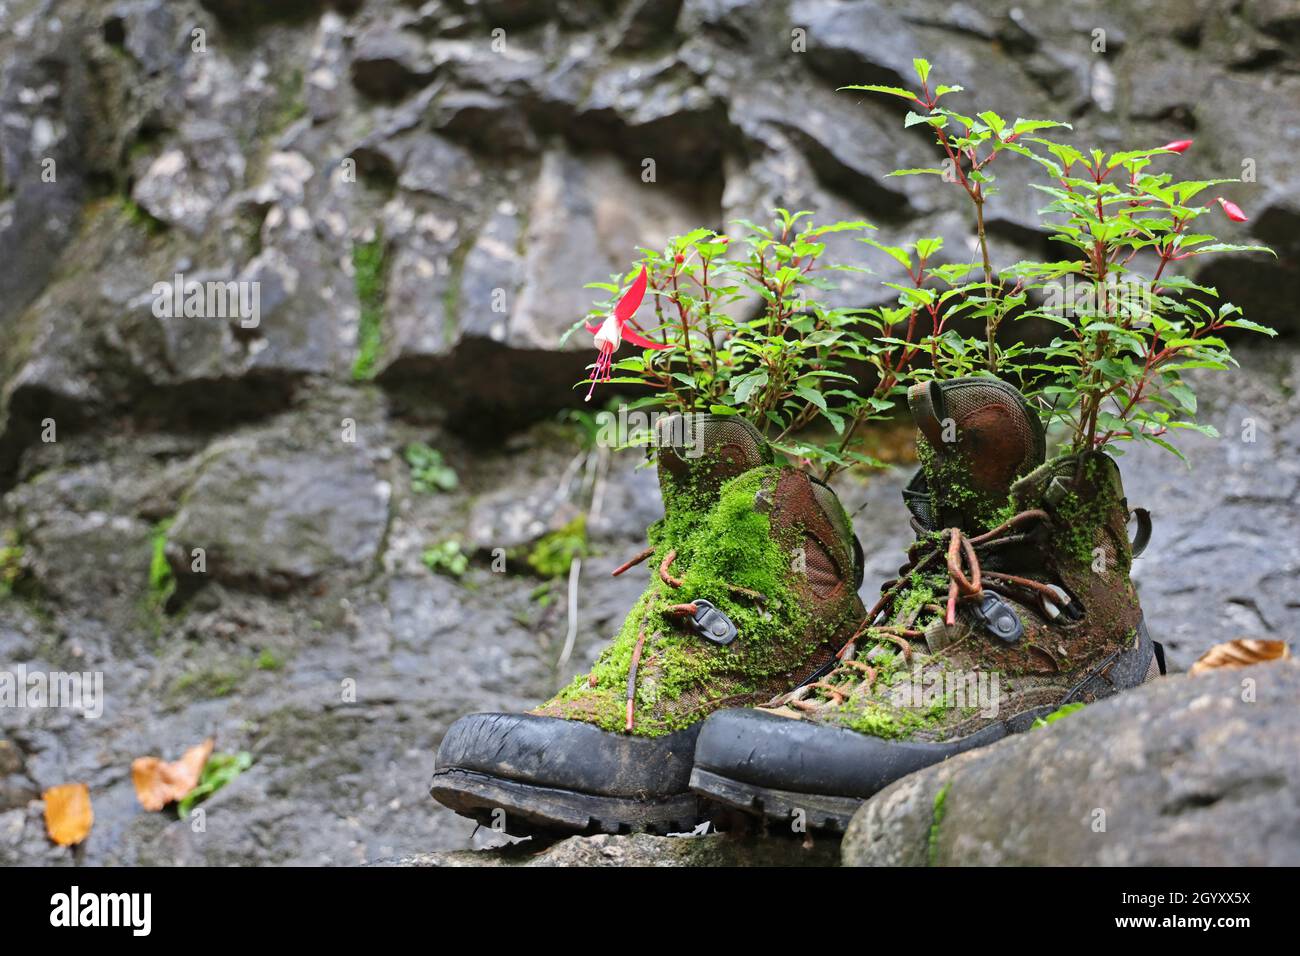 old planted hiking boots covered in moss on stony mountain ground Stock Photo